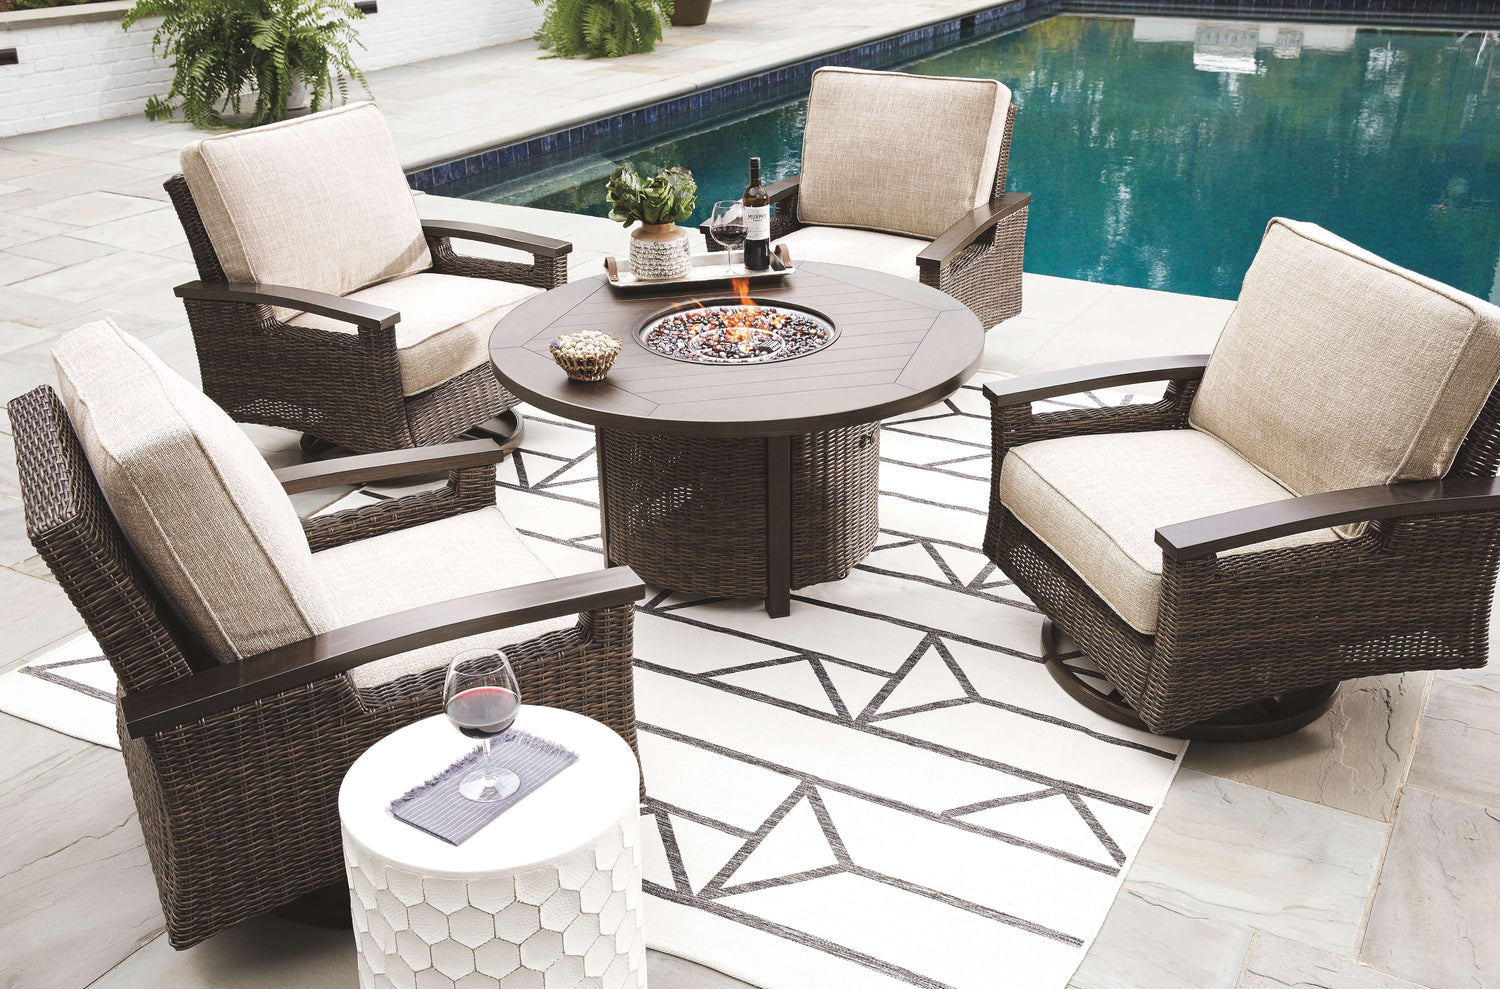 Outdoor Furniture > Outdoor Seating